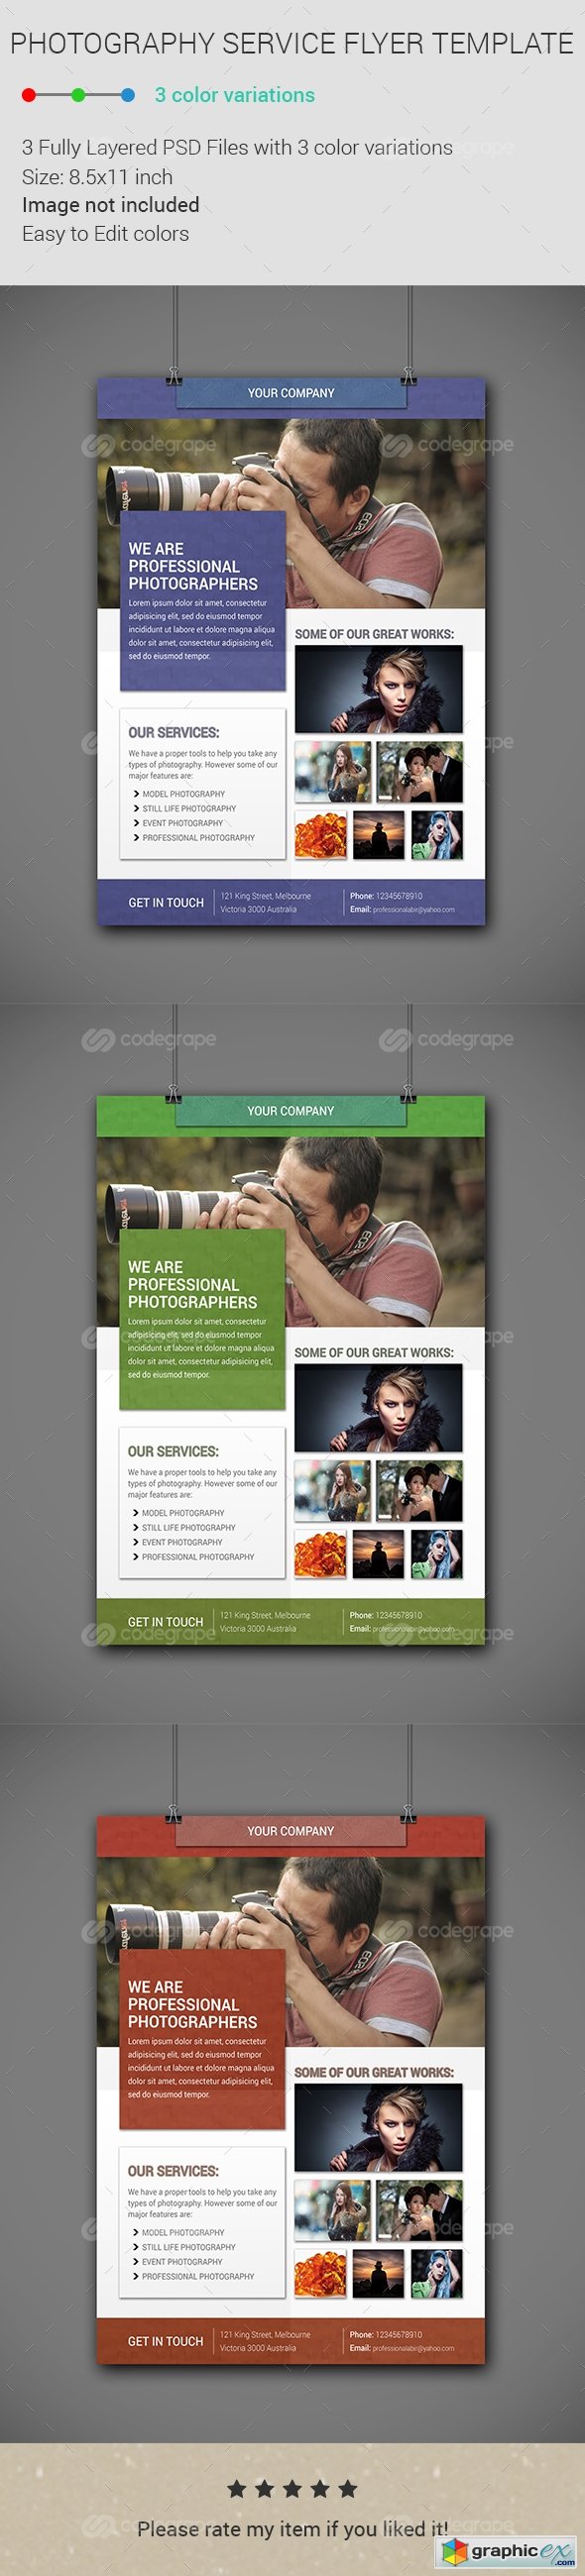 Photography Service Flyer Template 6324